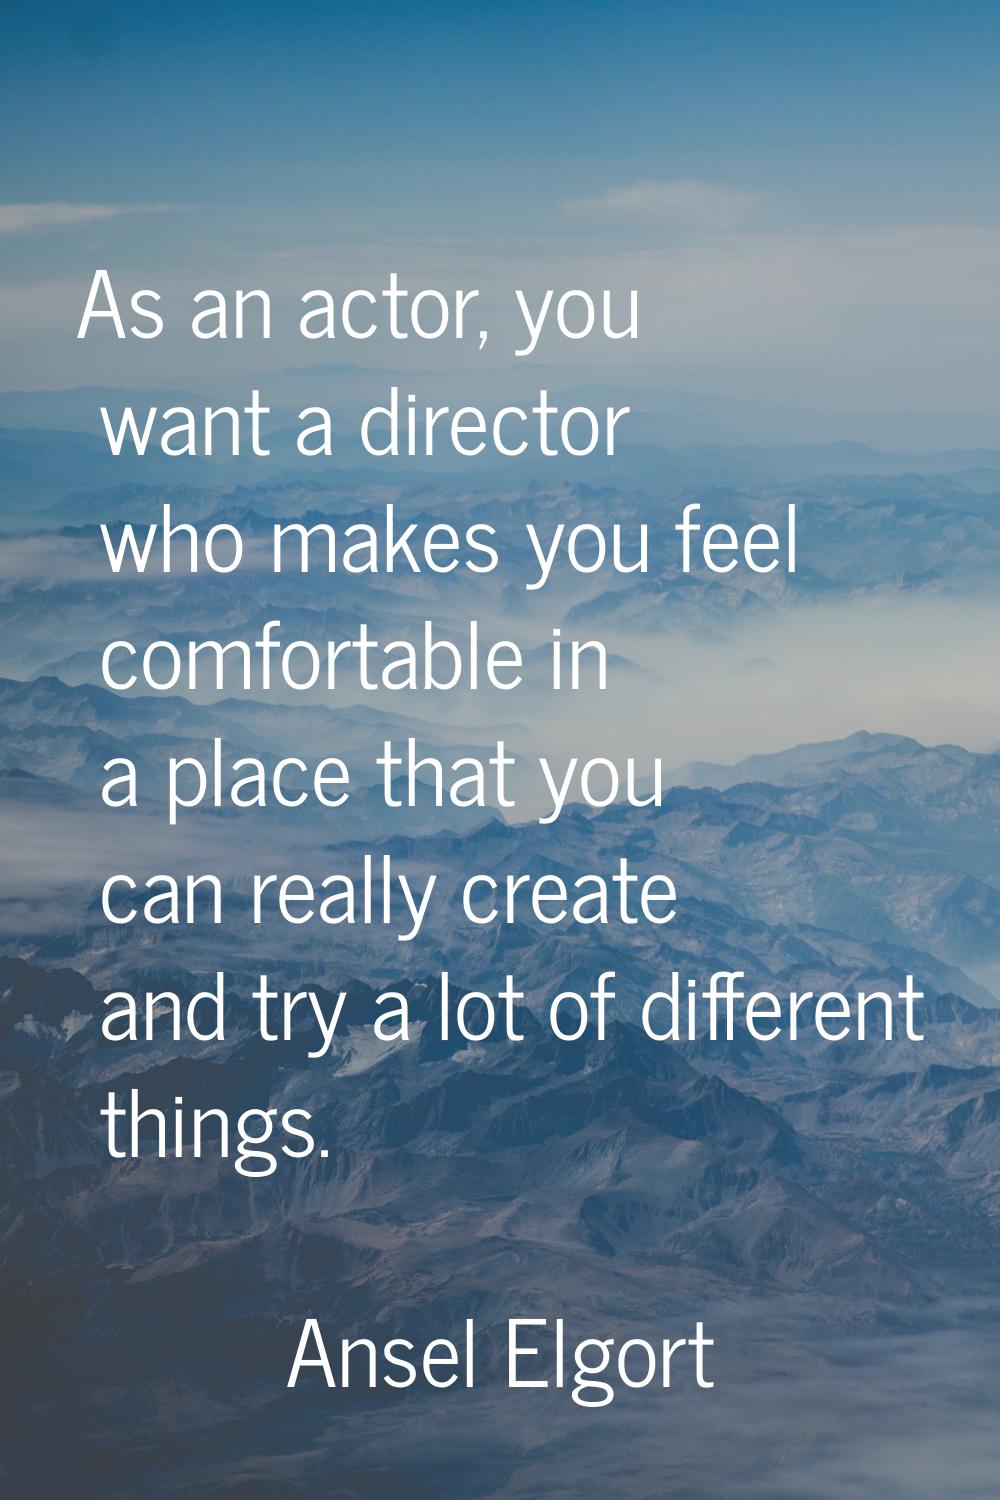 As an actor, you want a director who makes you feel comfortable in a place that you can really crea